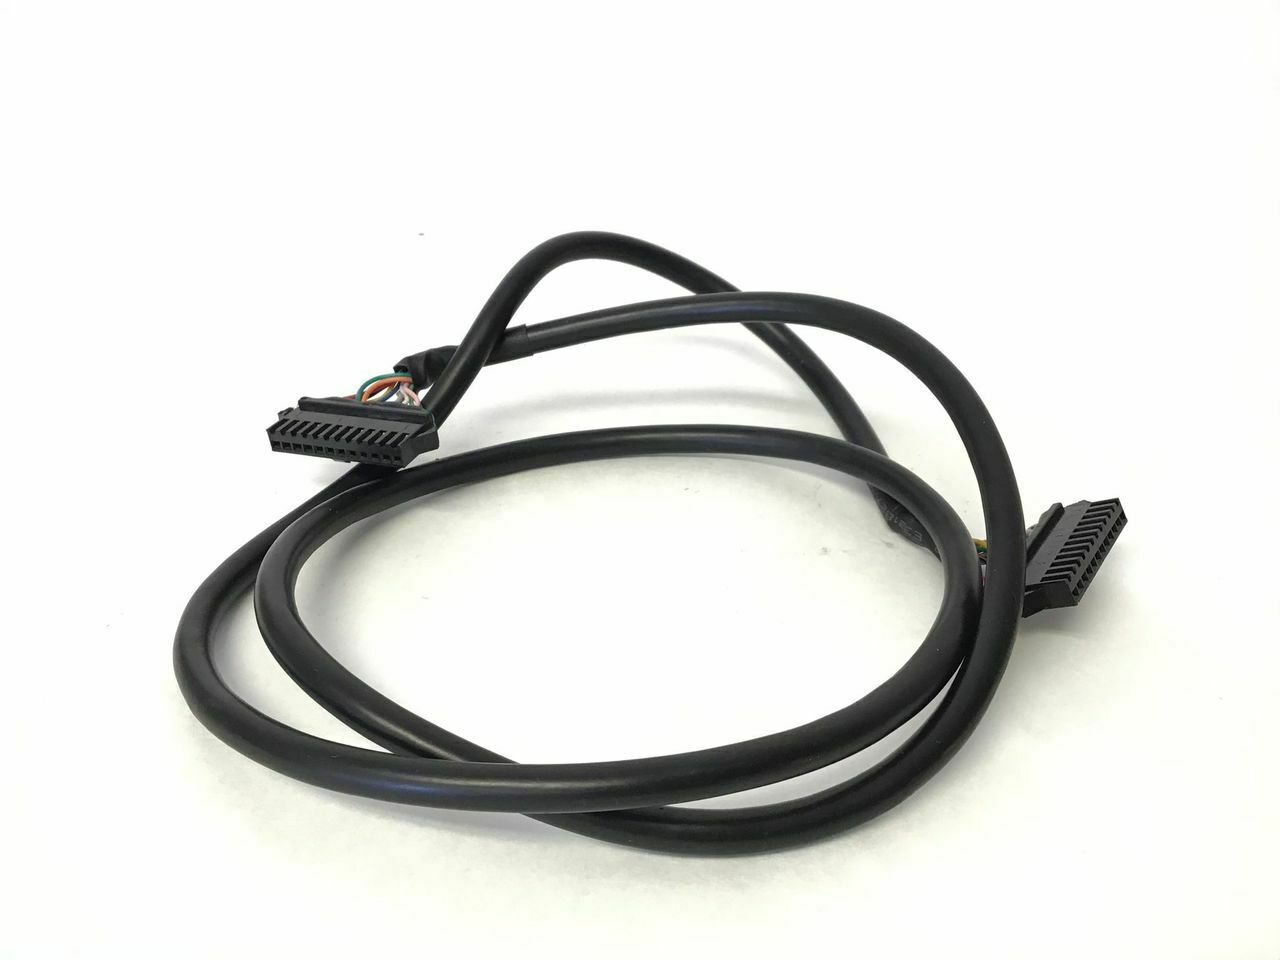 Lifecore LC985VG Elliptical Secondary Wire Harness Cable (Used)